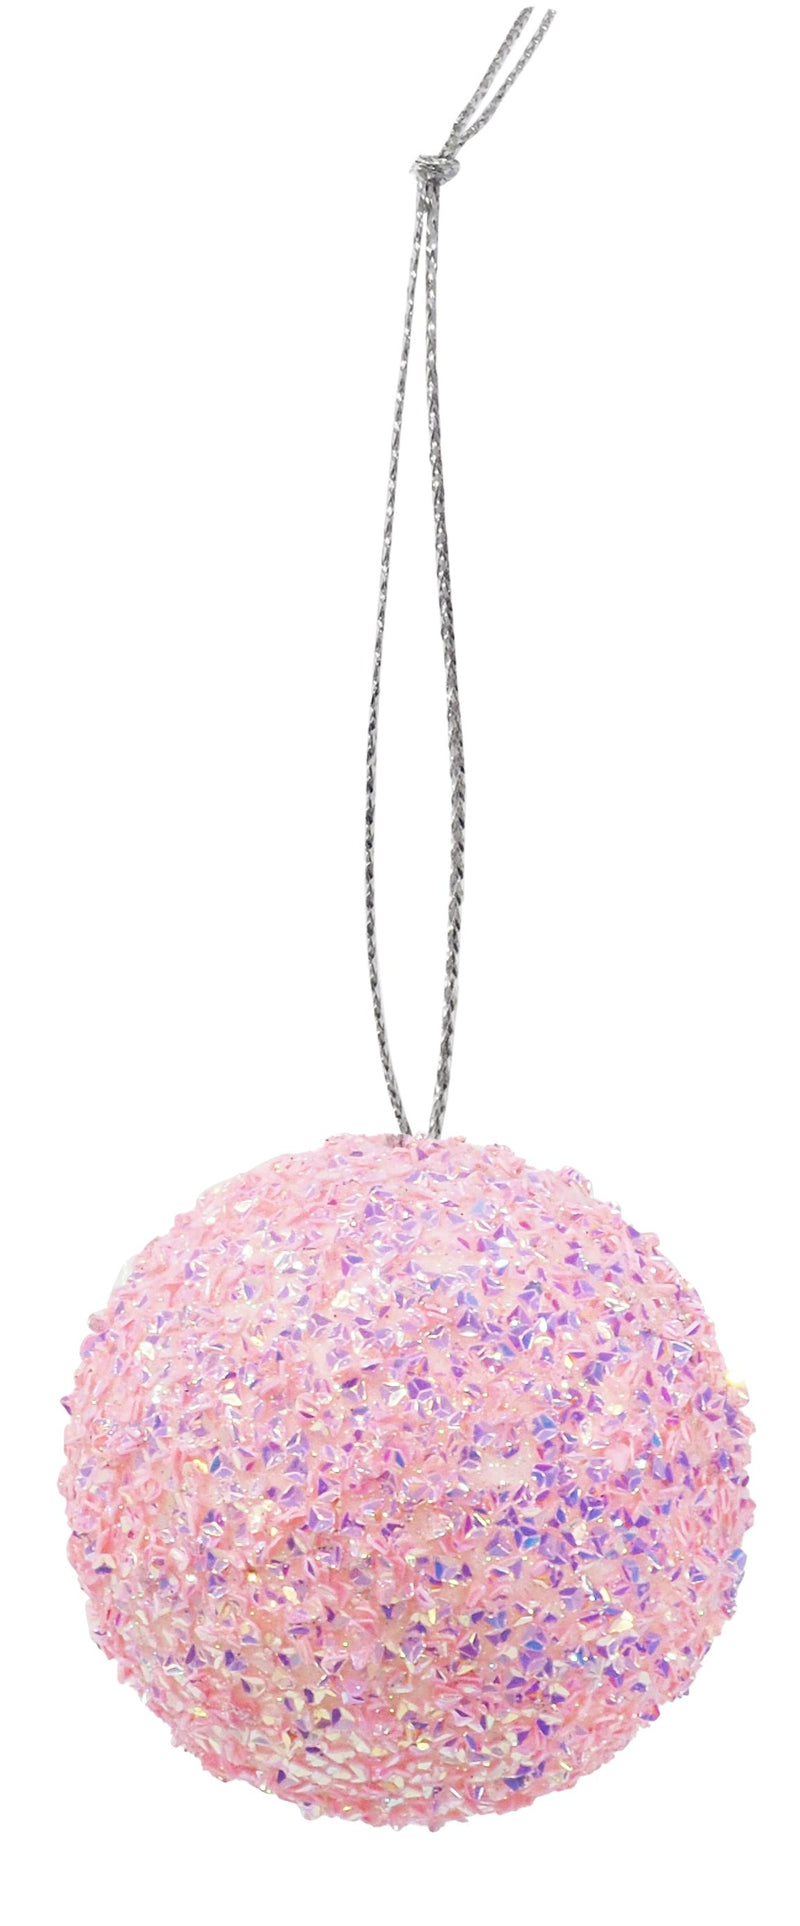 COMING SOON - IRIDESCENT GLEAMING BAUBLE